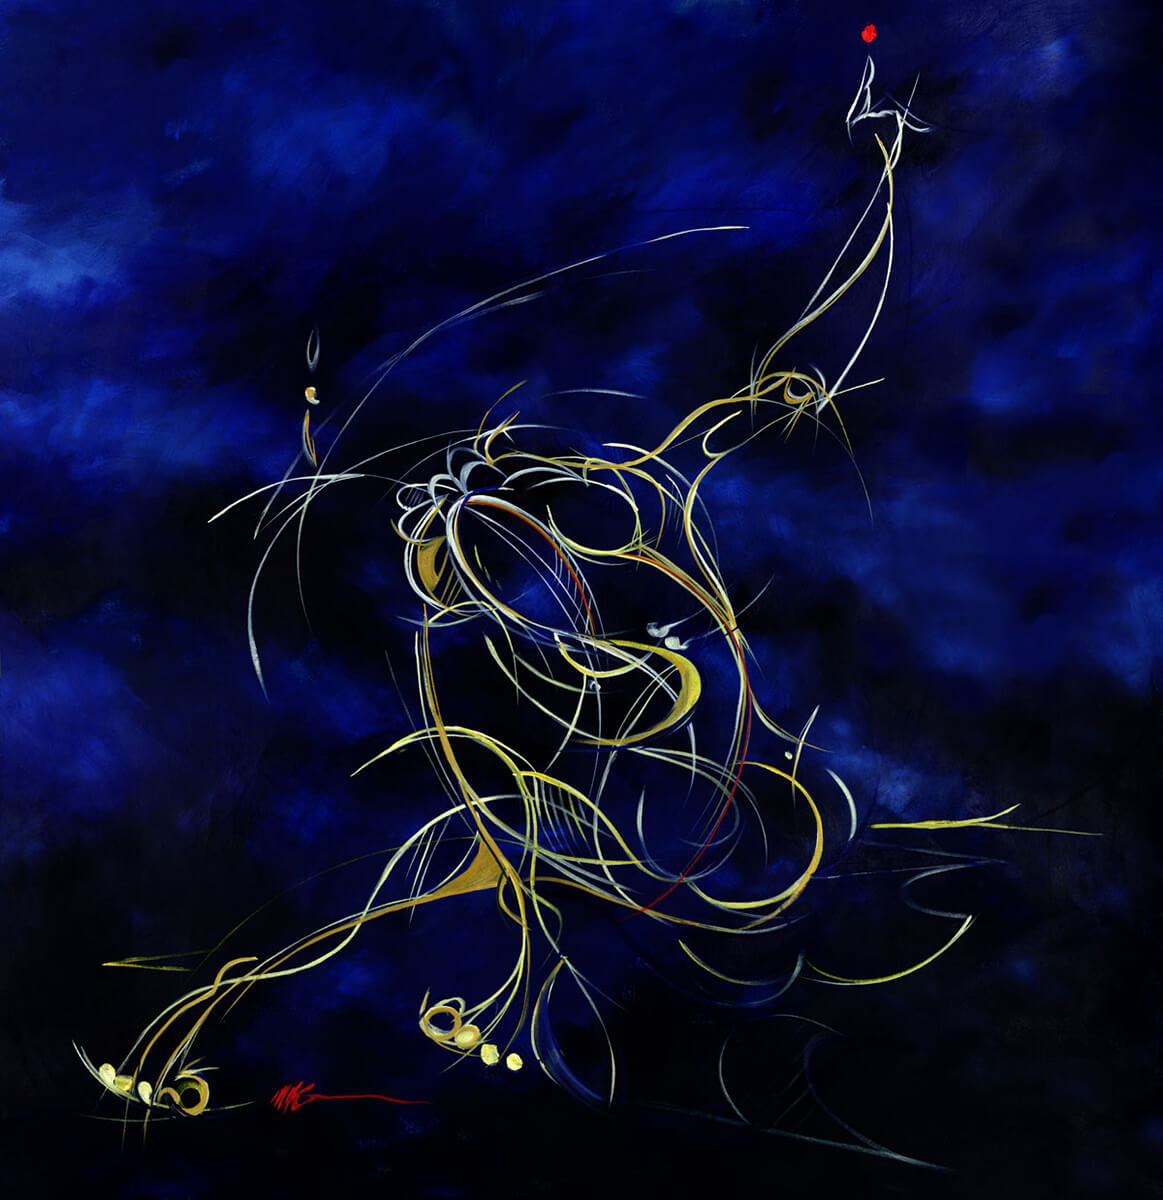 Photo of a painting by artist and painter Michael J. Korber's titled Blue Dancer in oil on linen at Palm Beach Studios in West Palm Beach, Florida.